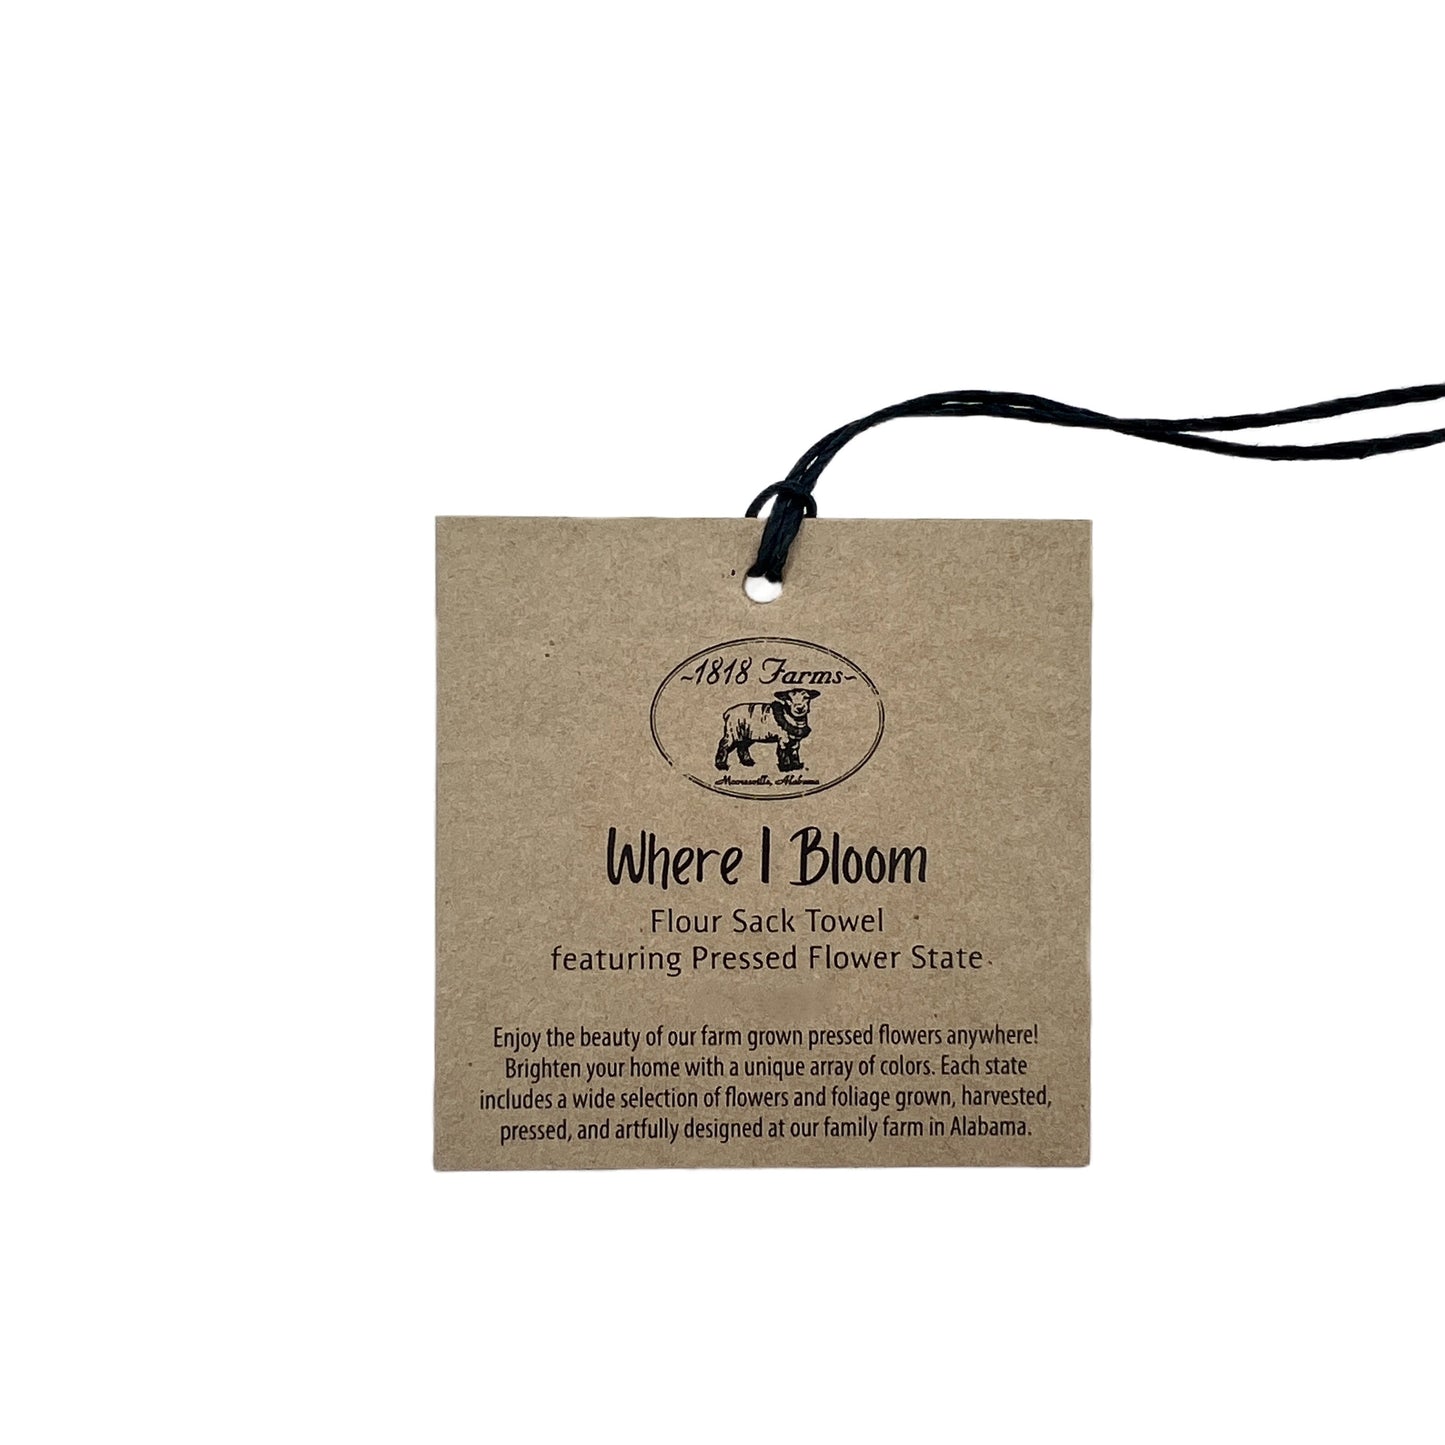 State Themed Flour Sack Towel Featuring Dried, Pressed Flowers - "Where I Bloom" Collection Towel 1818 Farms   